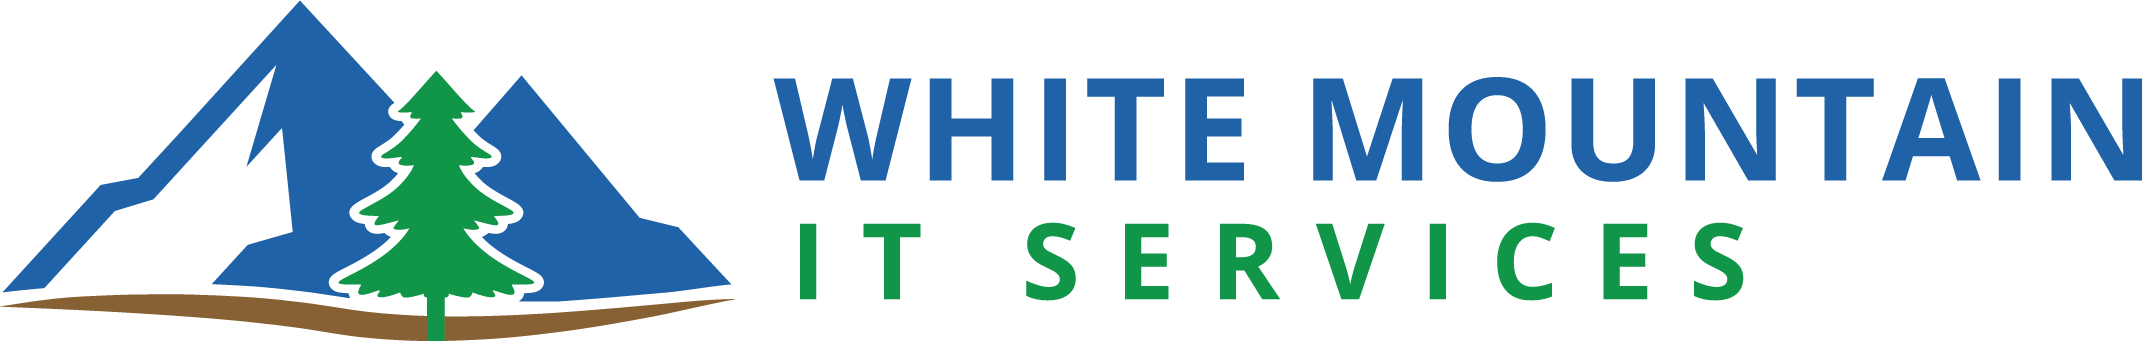 WHITE-MOUNTAIN-IT-SERVICES-01.png